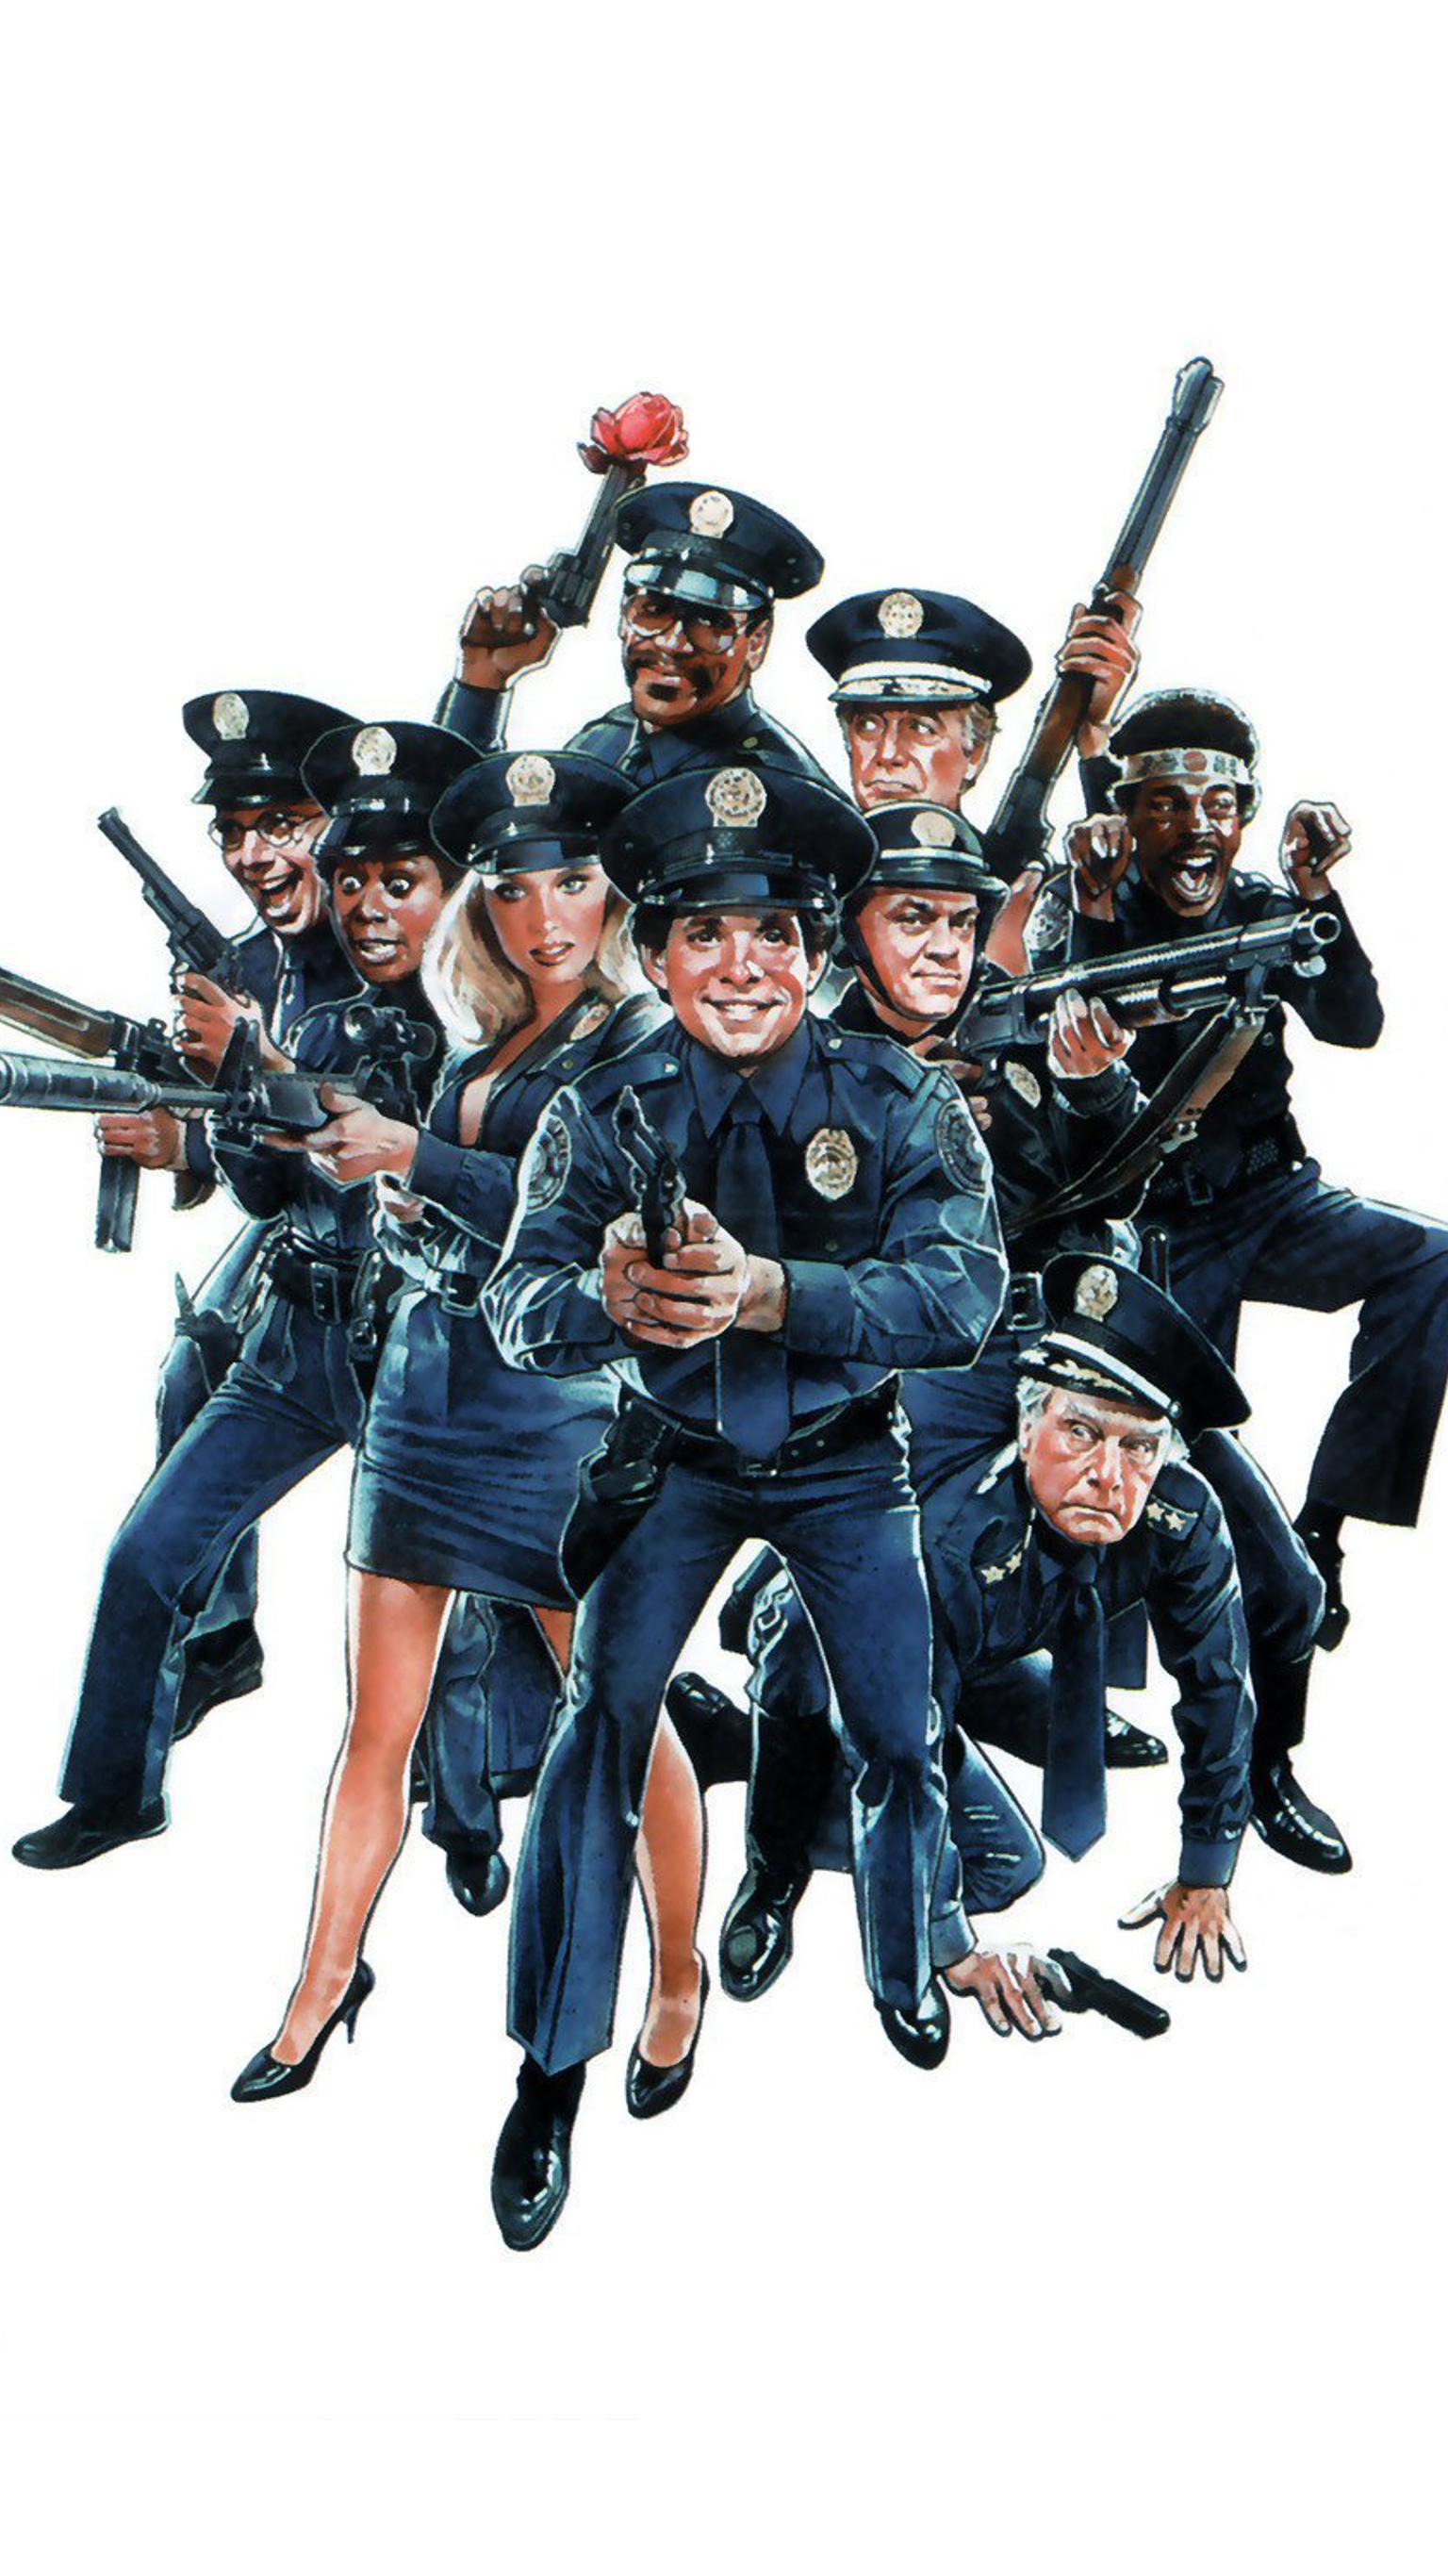 Police Academy Wallpaper Free Police Academy Background